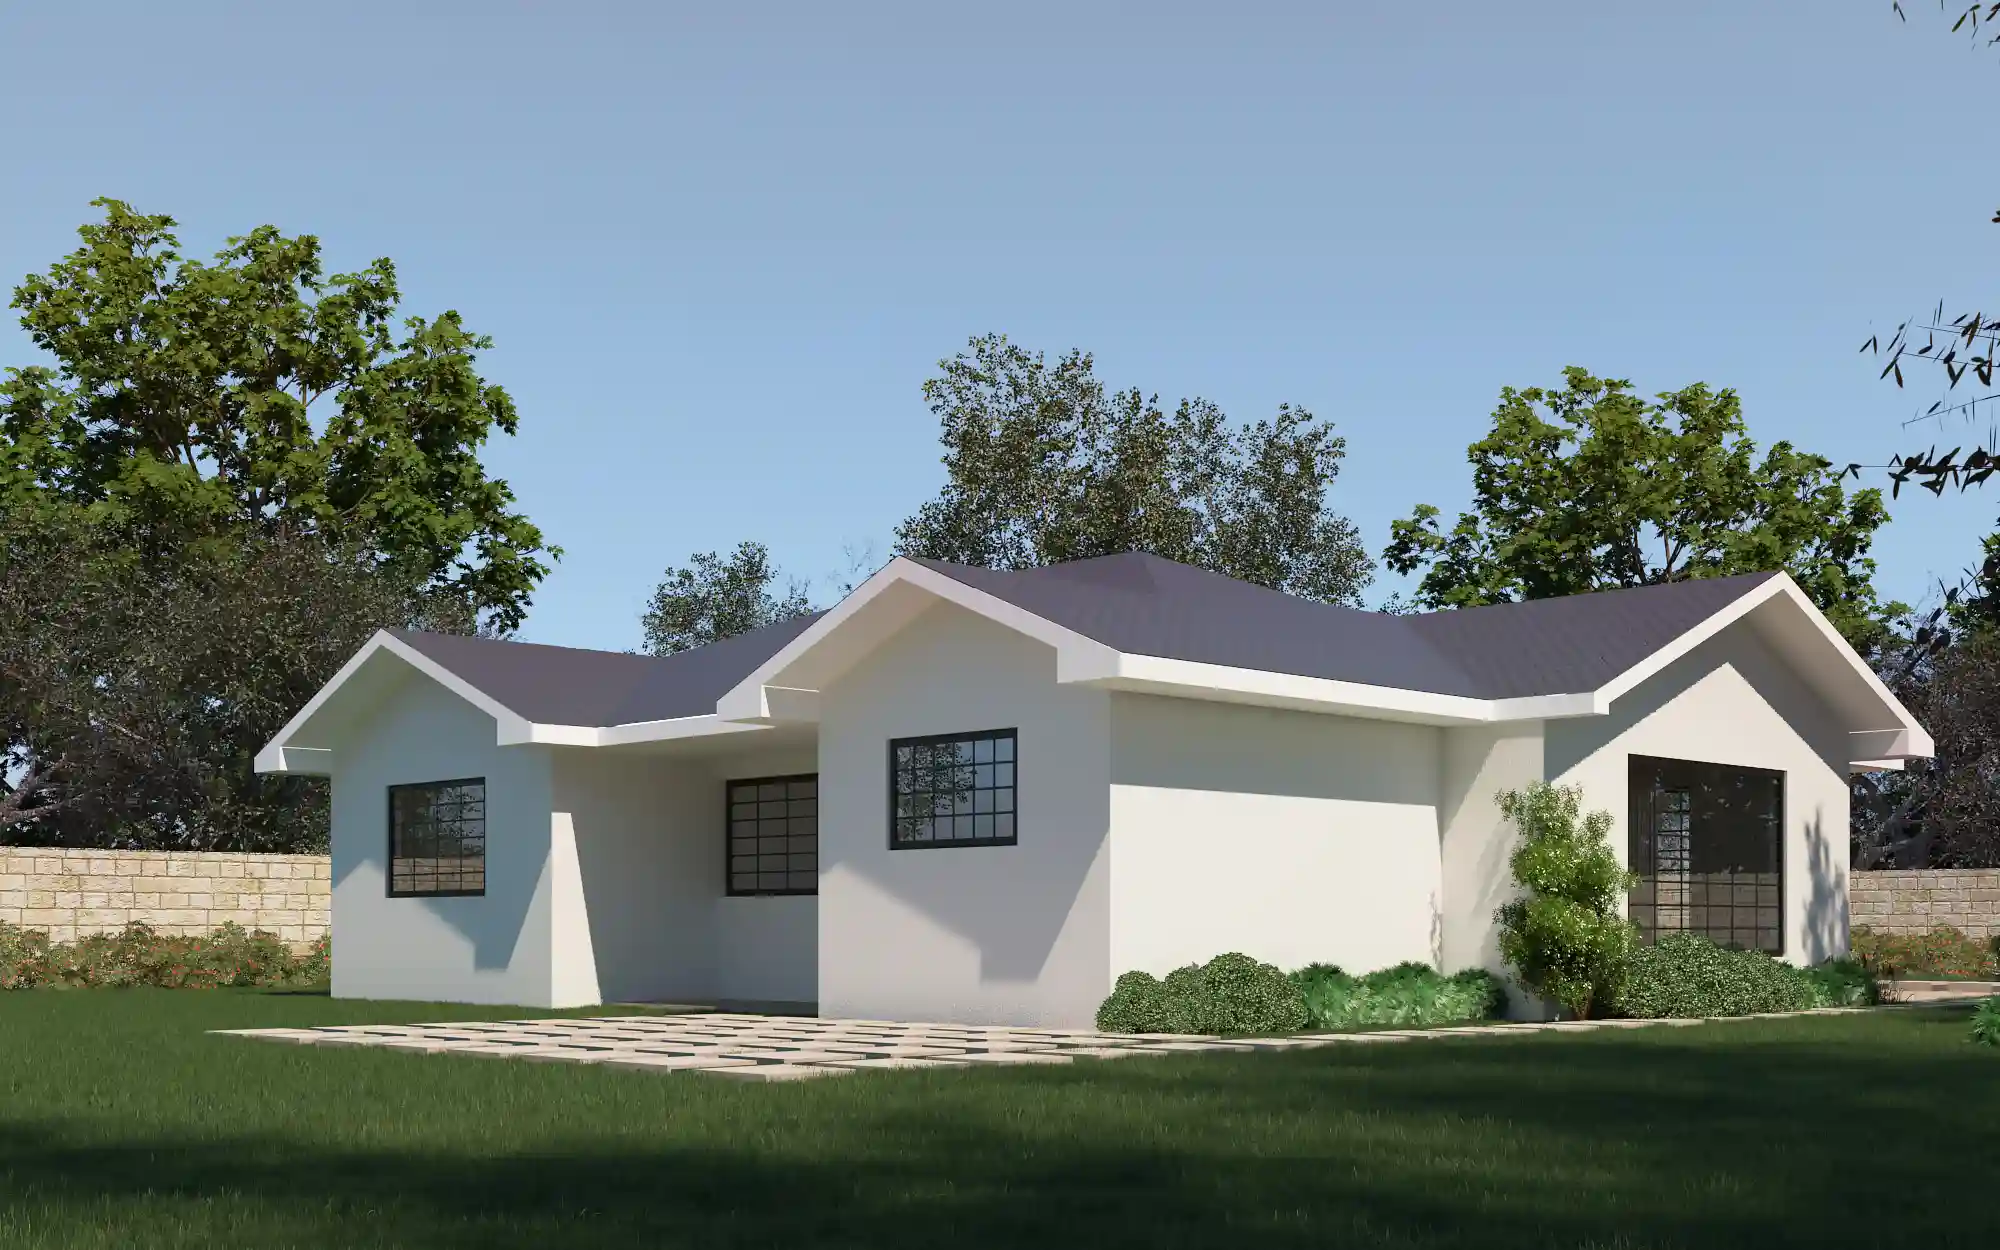 3 Bed Bungalow -ID 3161 - 3161_back.jpg from Inuua Tujenge house plans with 3 bedrooms and 2 bathrooms. ( bungalow )